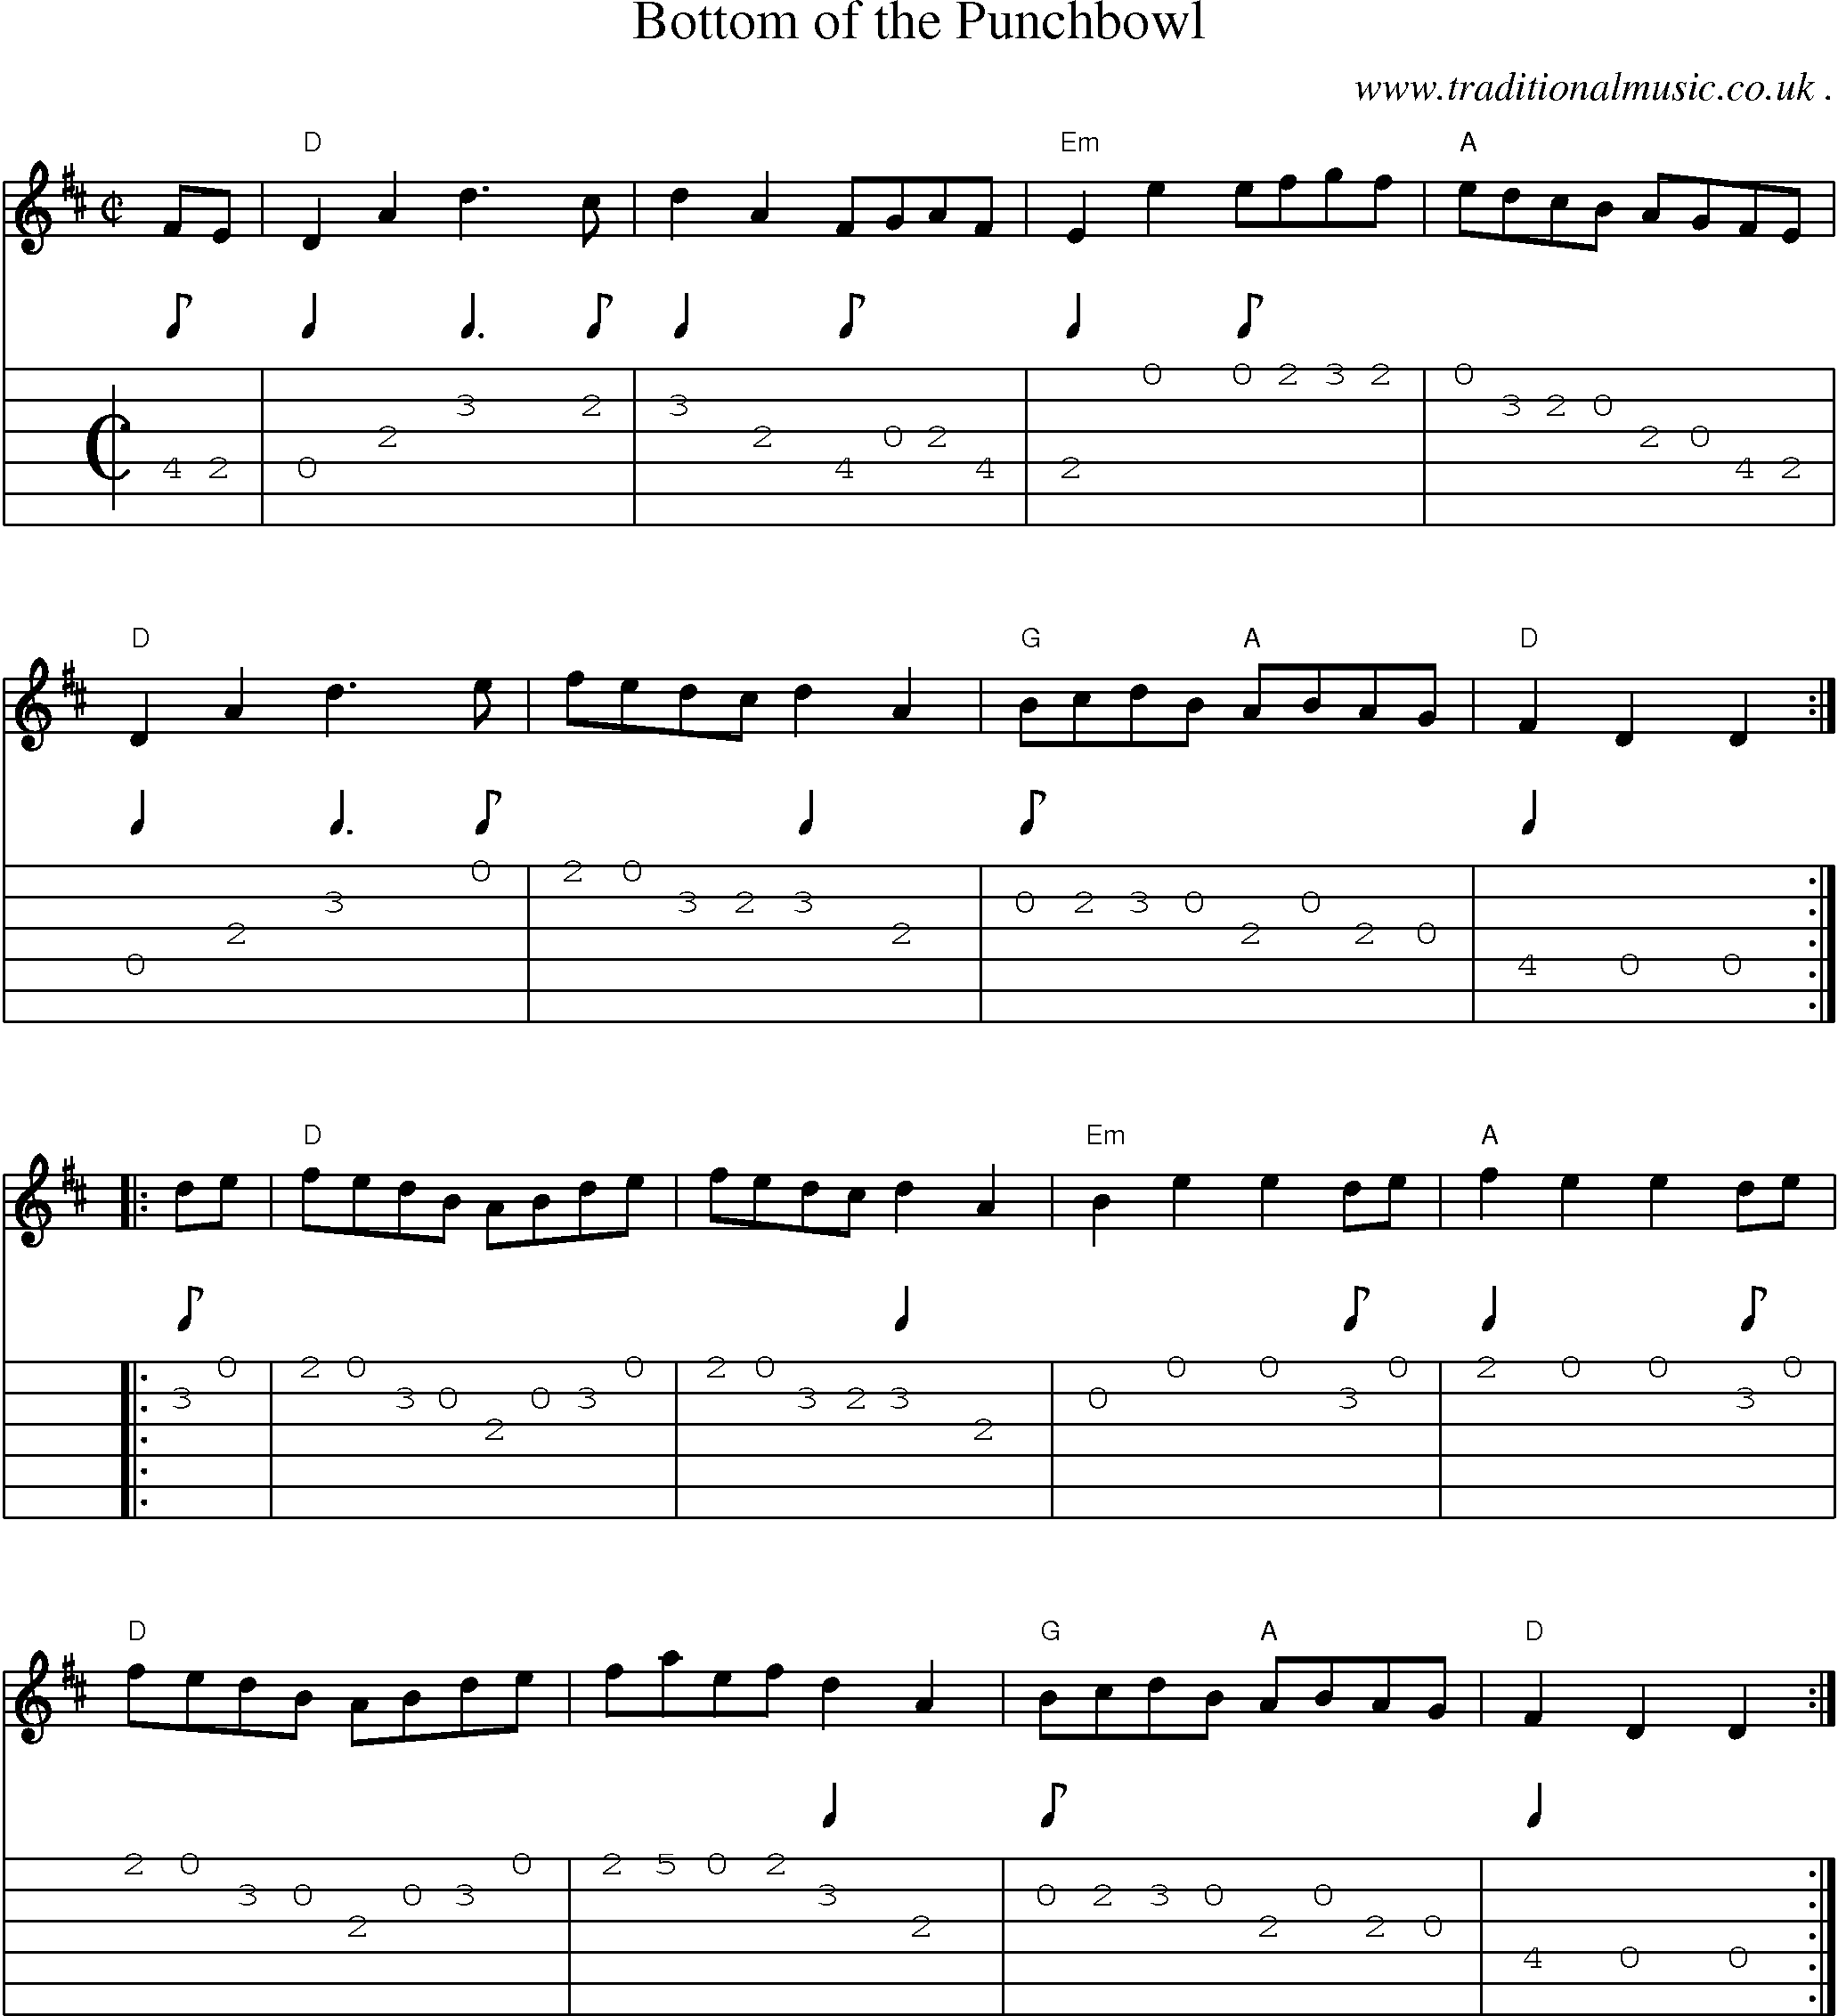 Music Score and Guitar Tabs for Bottom Of The Punchbowl